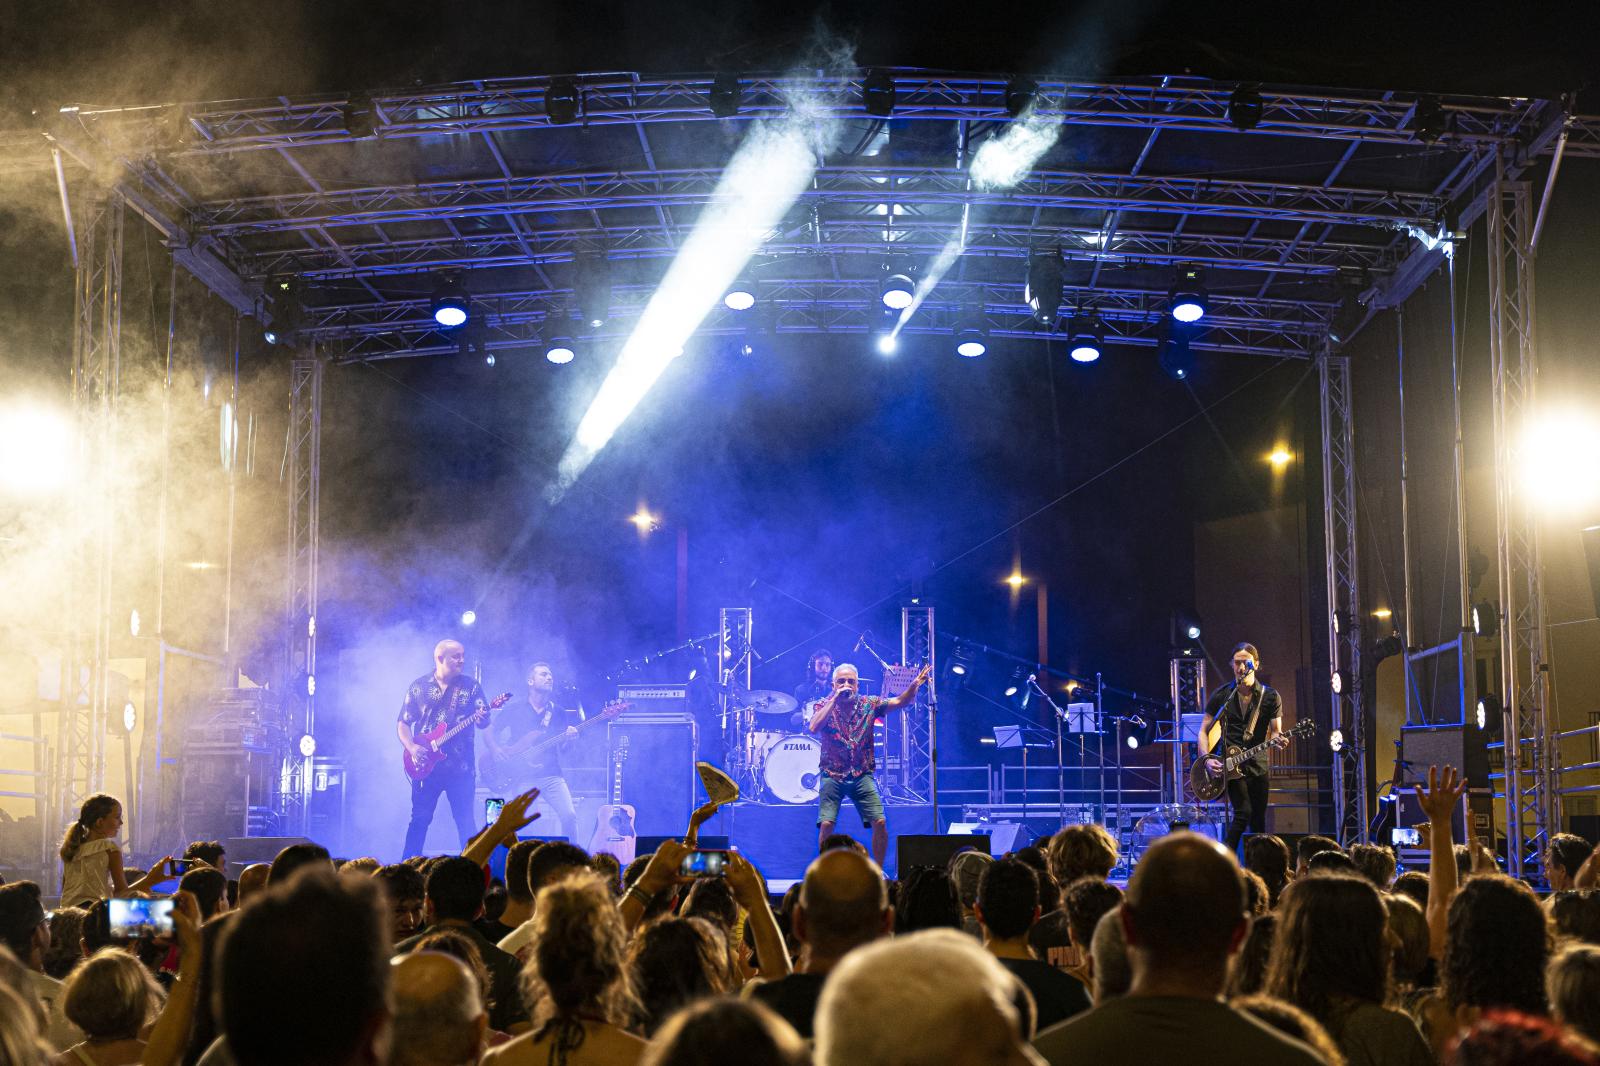 Image from Daily News - The band from Ibiza, Ressonadors, give a concert in the...